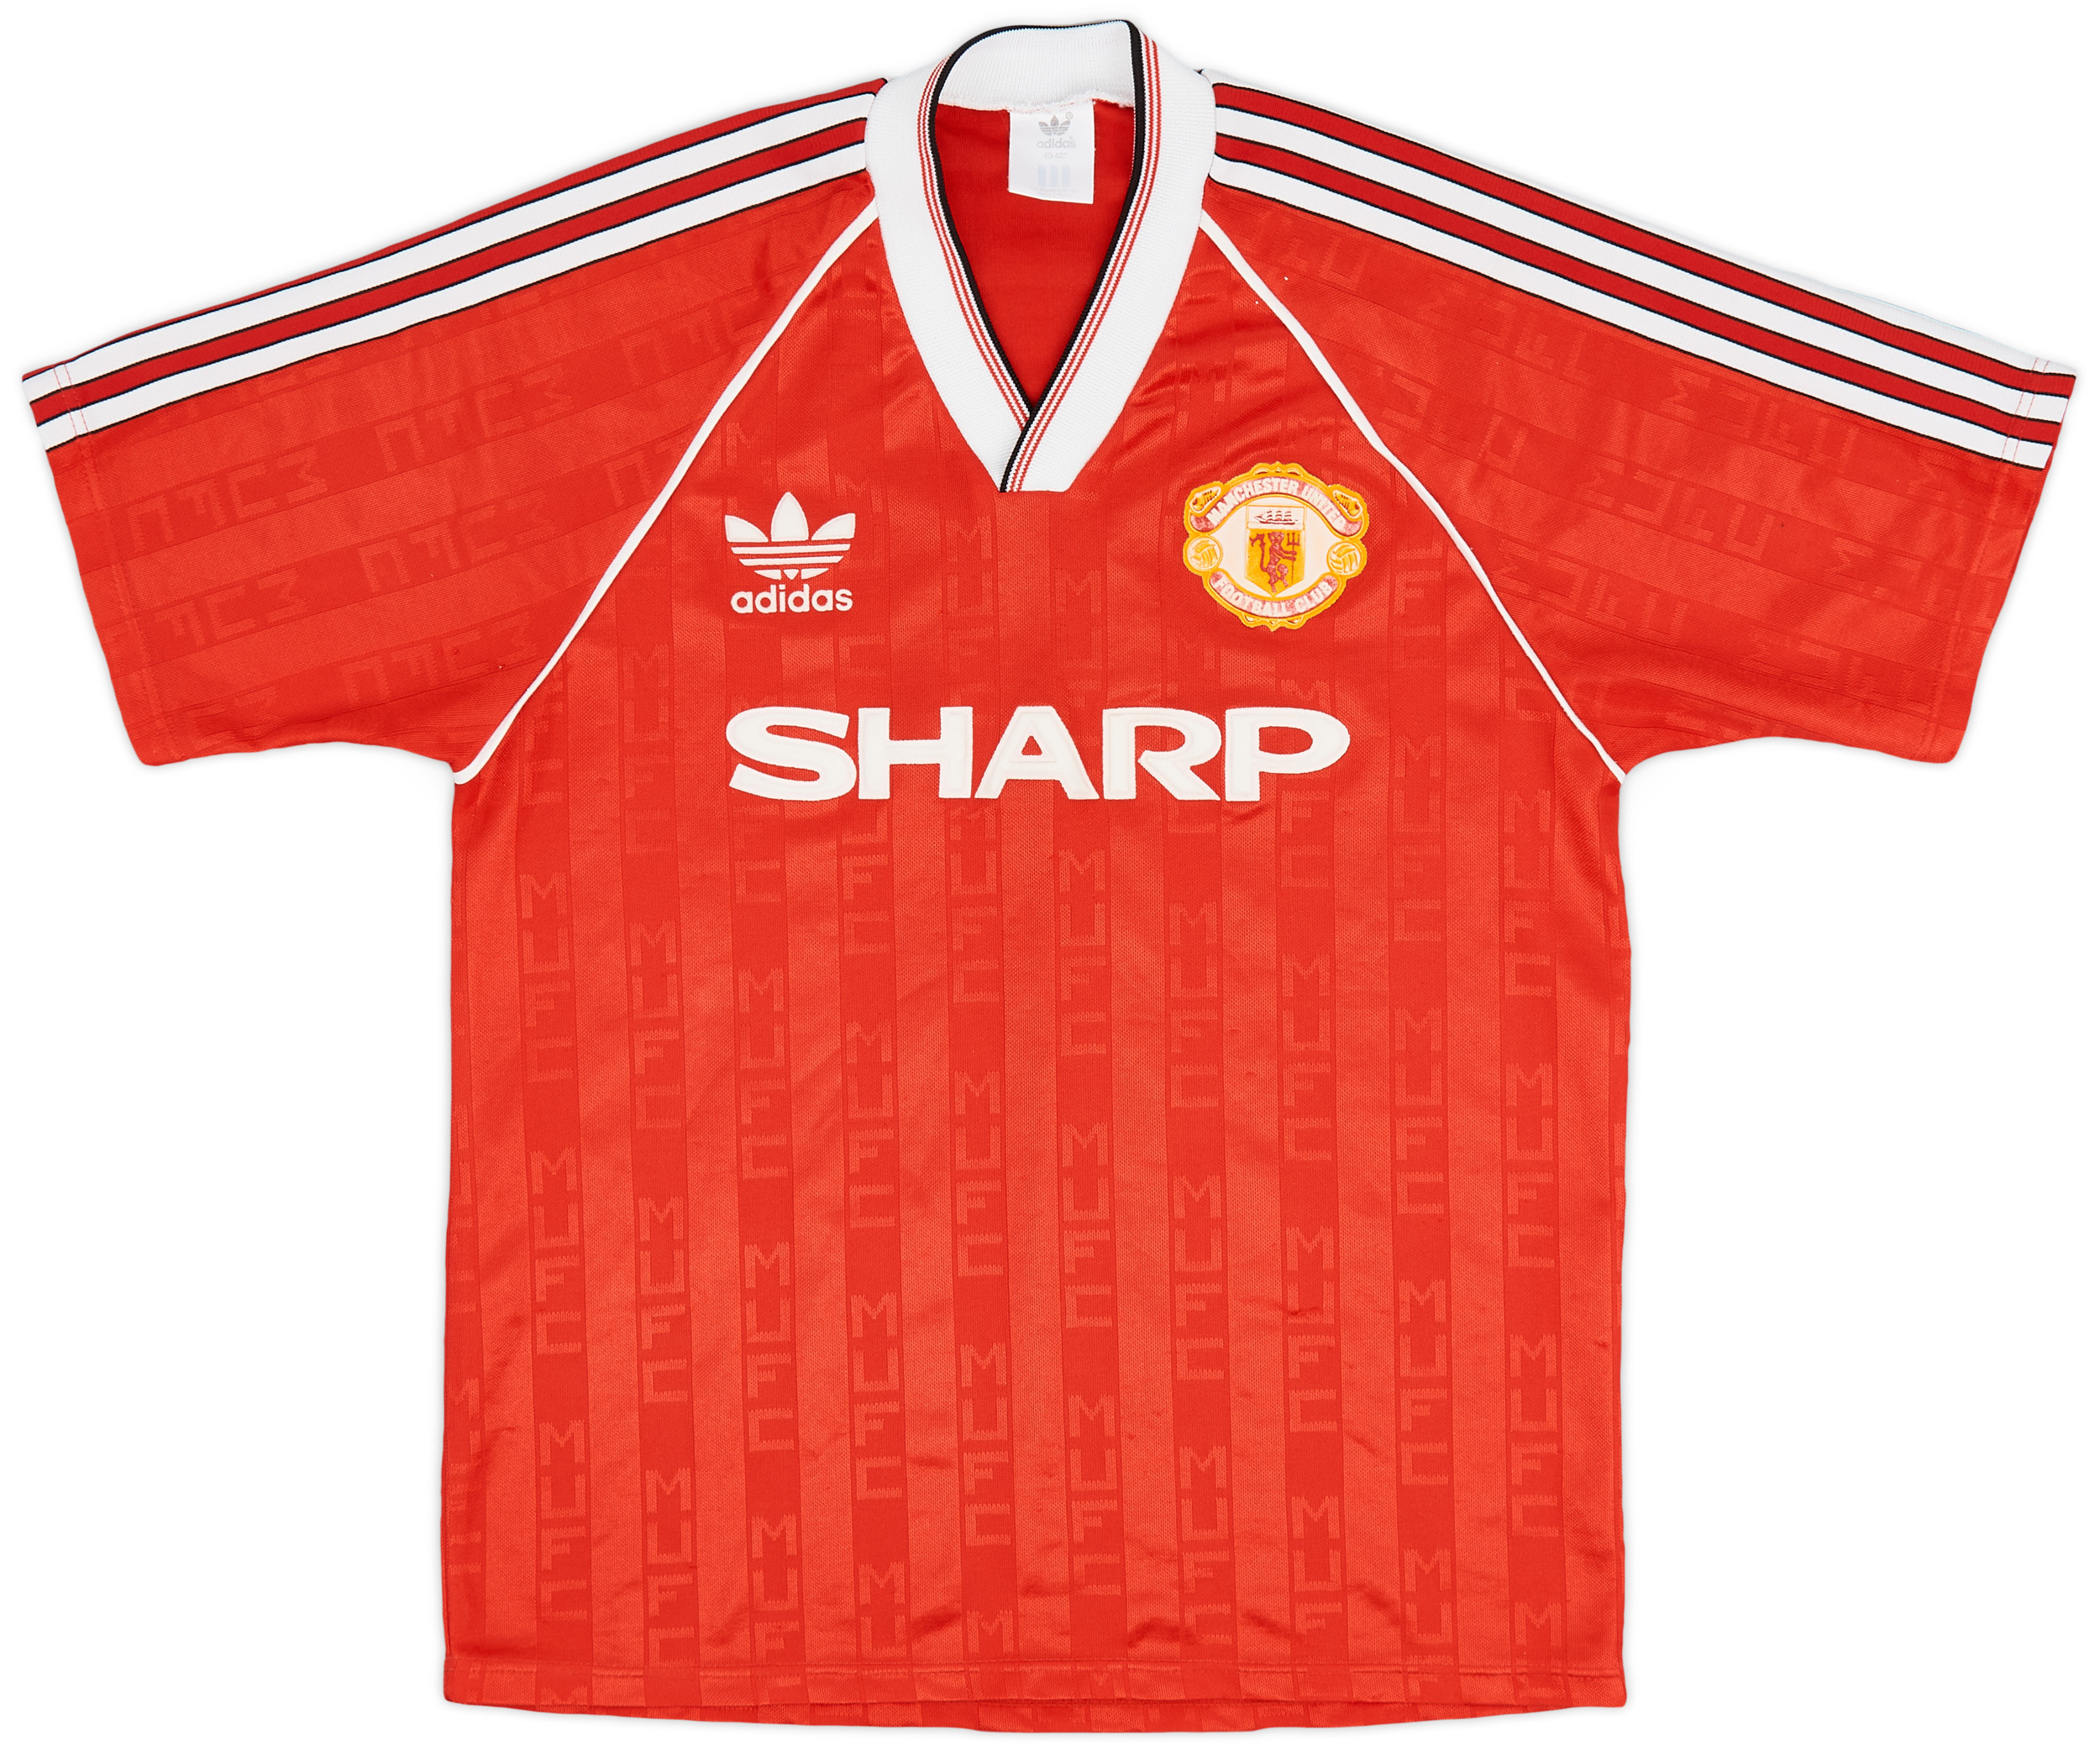 1988-90 Manchester United Home Shirt - 8/10 - (/)